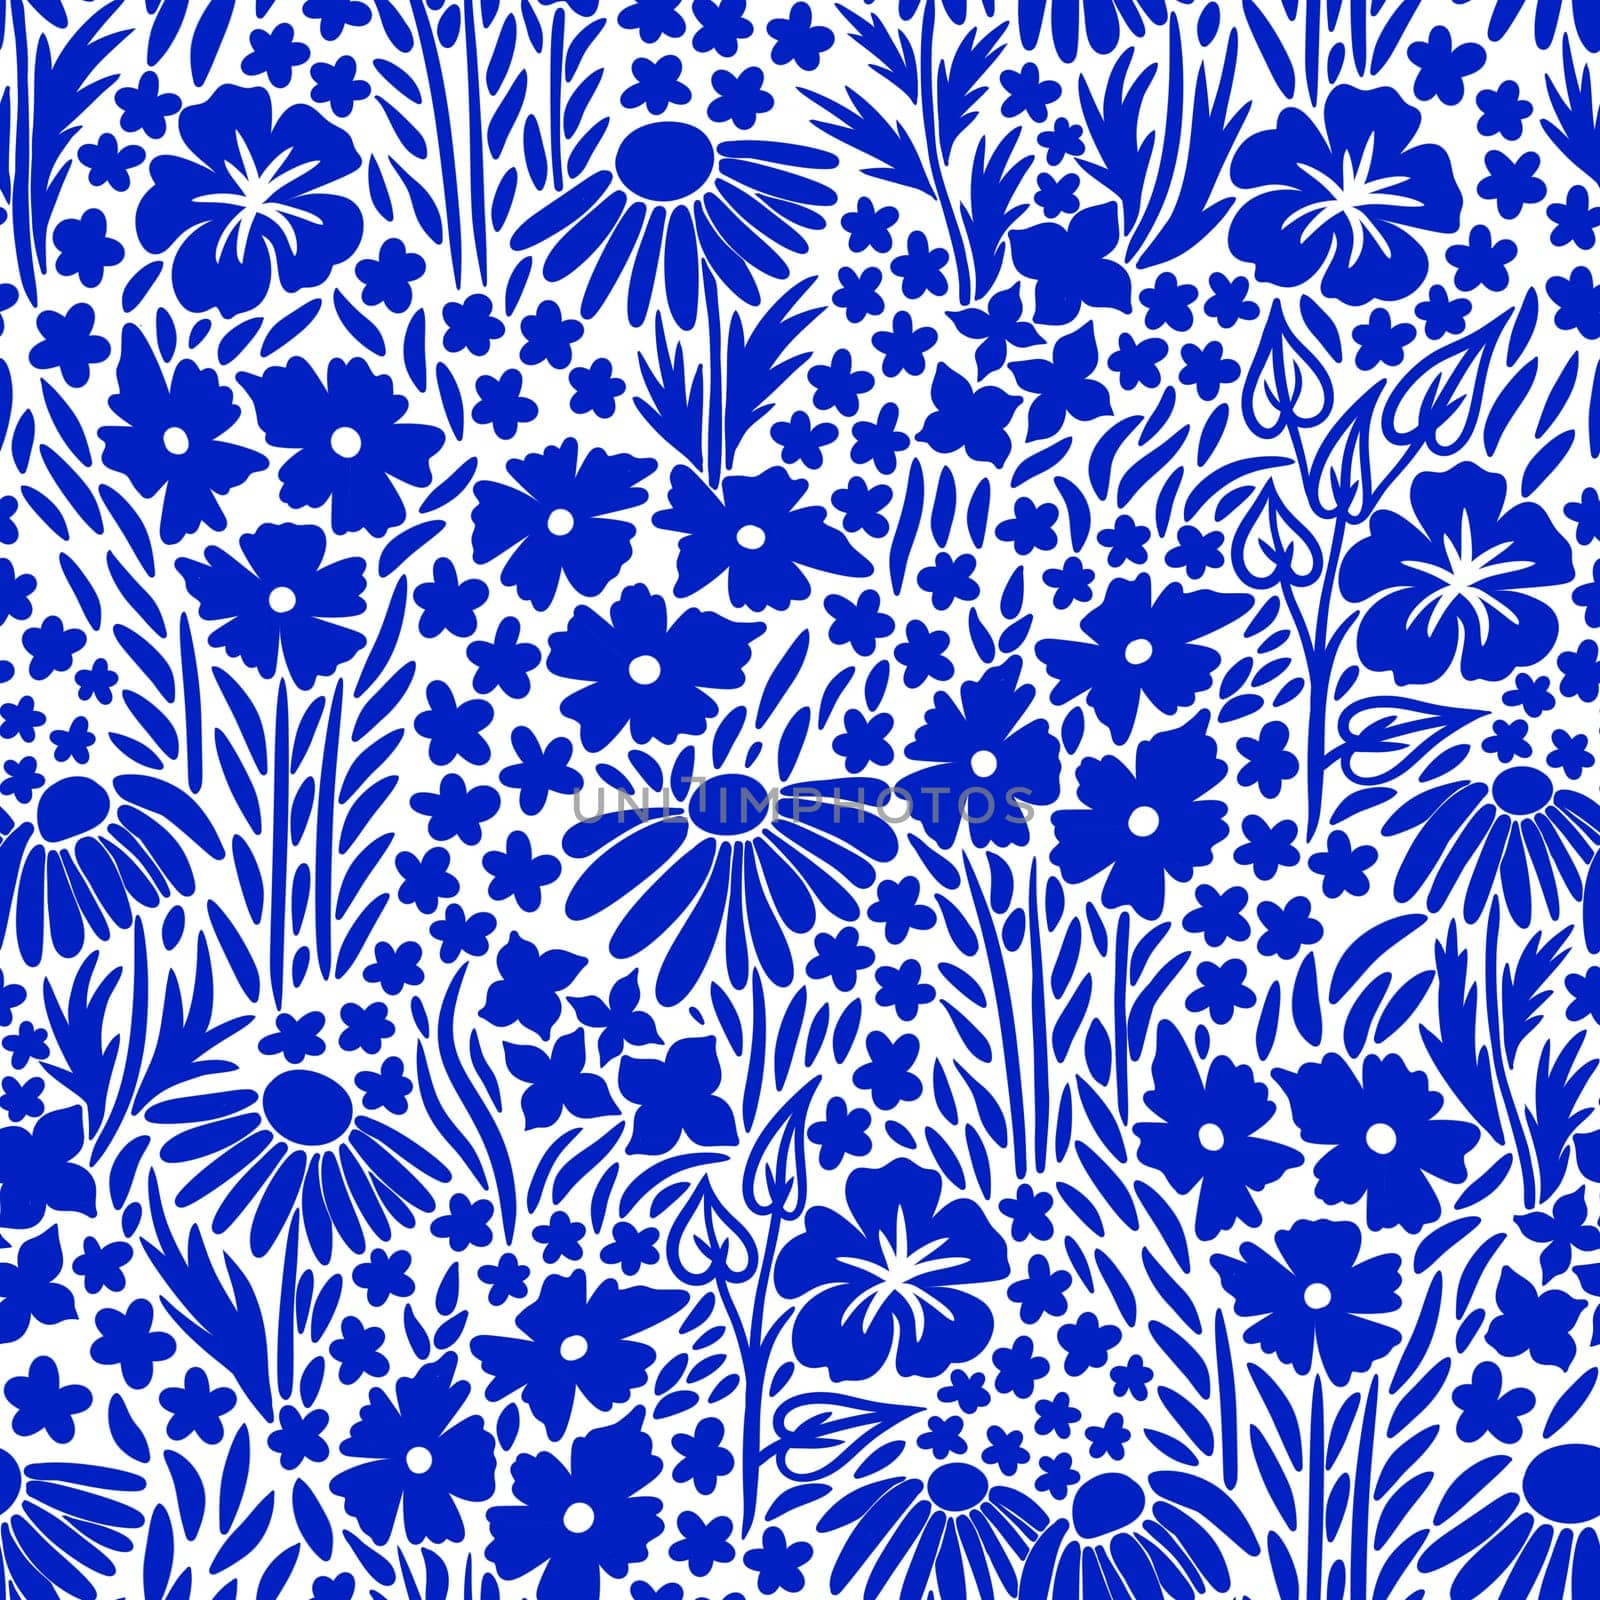 Hand drawn seamless floral flower pattern with cobalt blue wildflowers on white background. Chinoiserie style cottagecore summer garden meadow bloom blossom design, daisy ditsy art